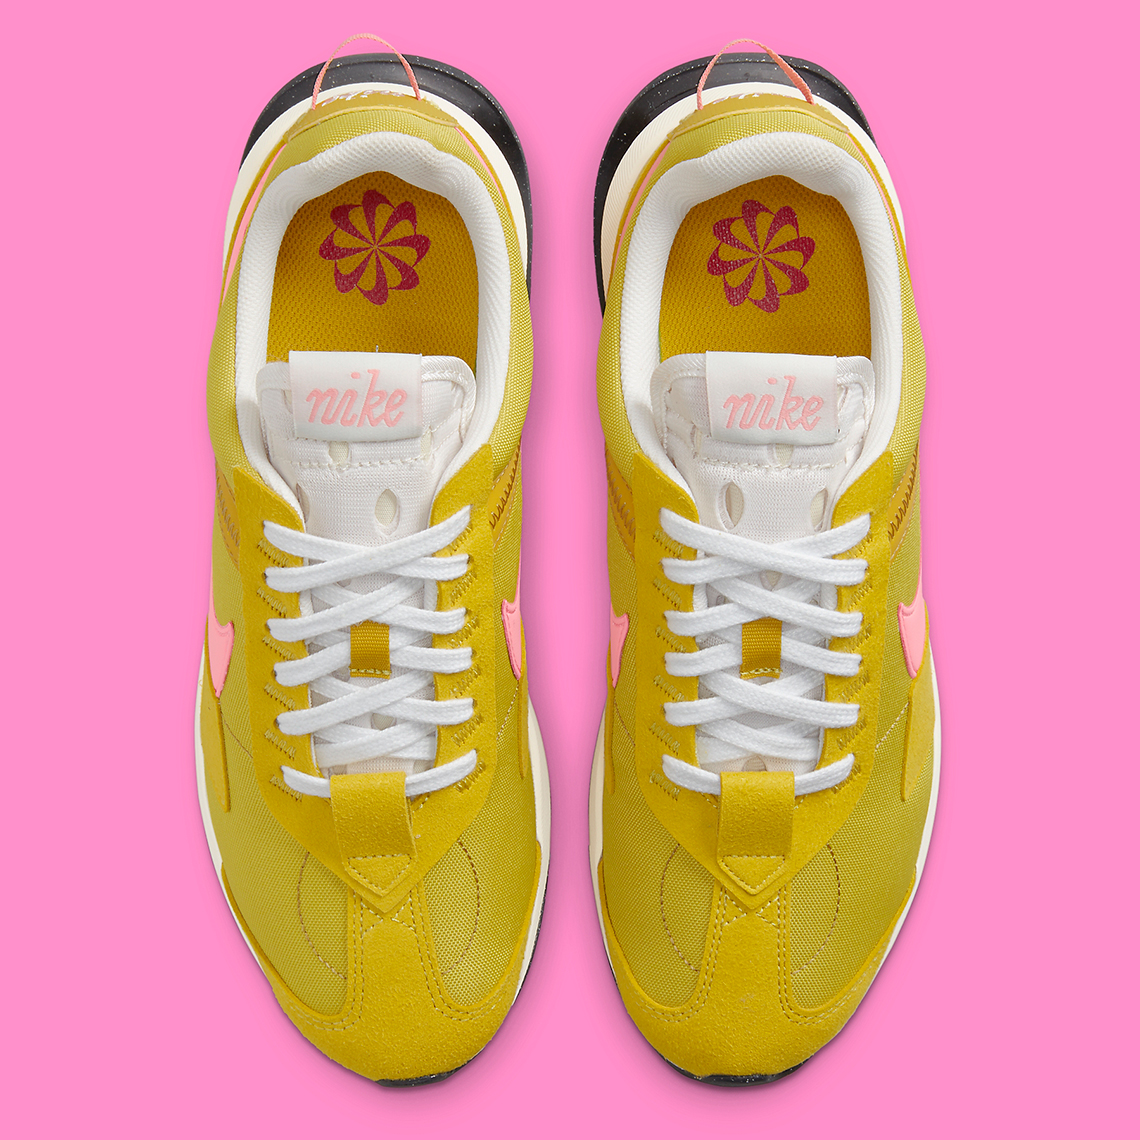 Nike Air Max Pre-Day Yellow Pink DH5676-300 | SneakerNews.com